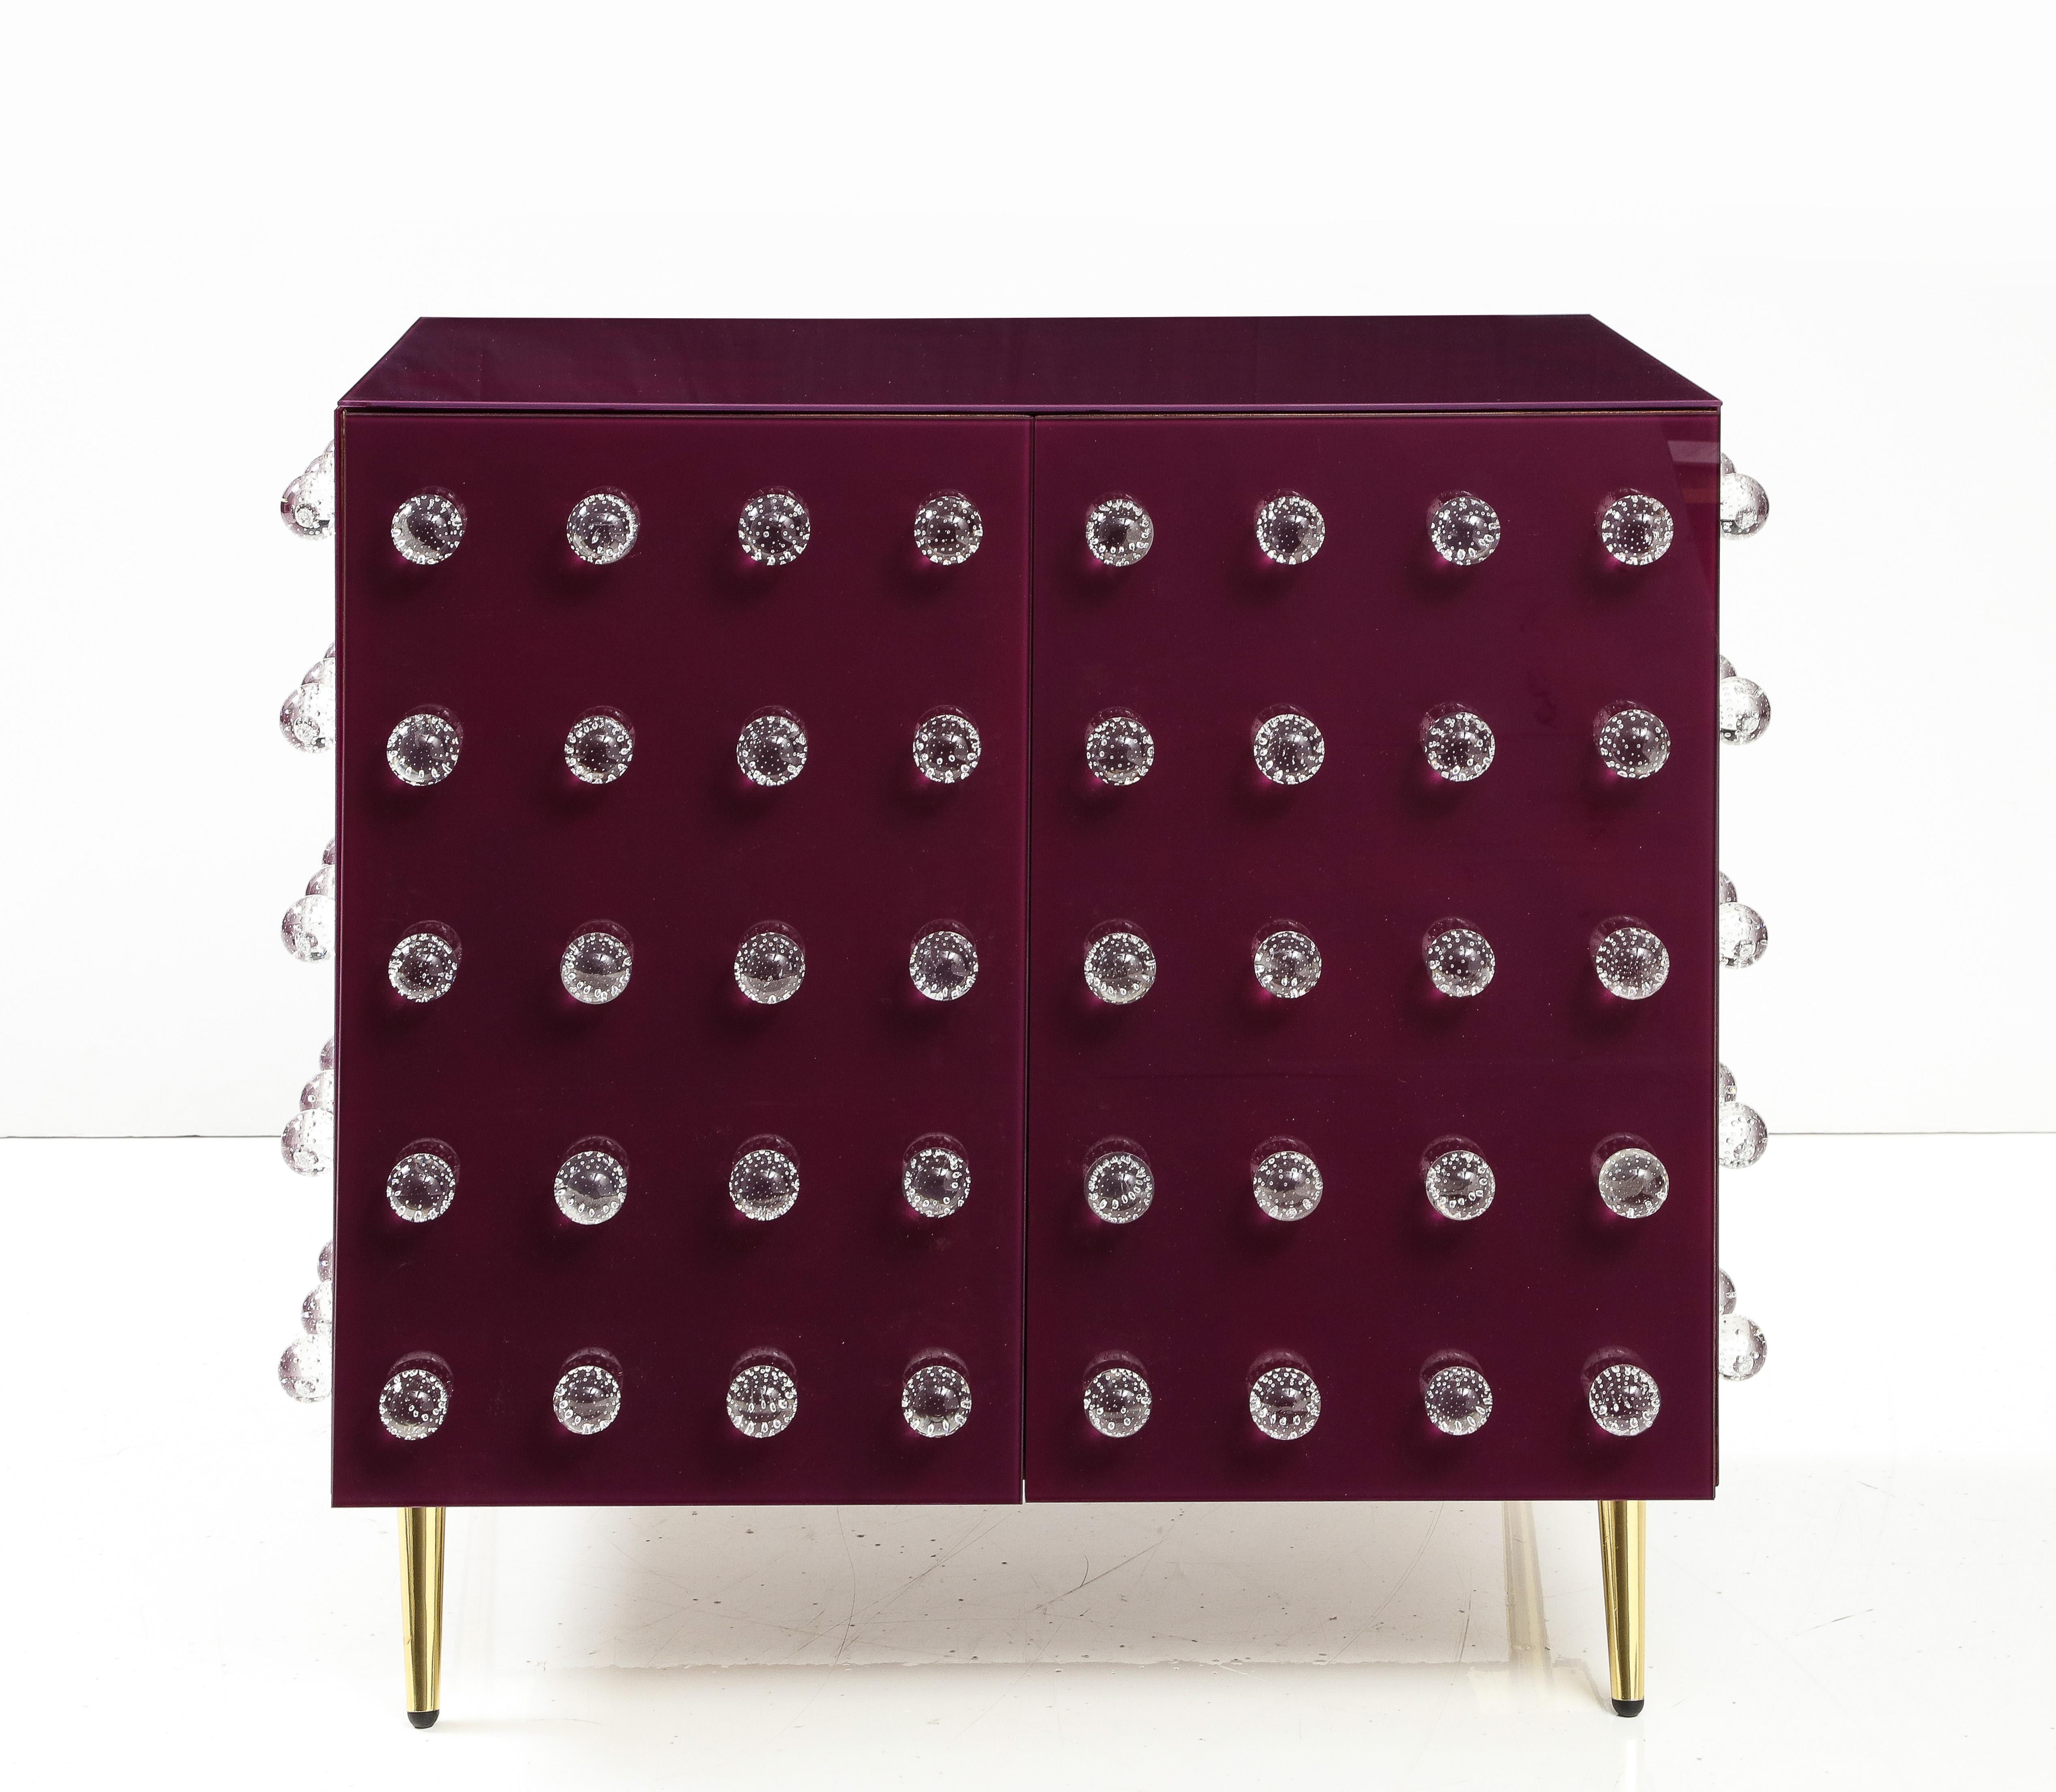 Bespoke, One-of-a-kind Pair of Aubergine Plum Glass with Murano Spheres Cabinets with Brass Legs handmade in Italy, 2023. Wooden frame is veneered or clad in reverse-painted art glass panels in a rich aubergine or plum color.  Hand-casted, solid